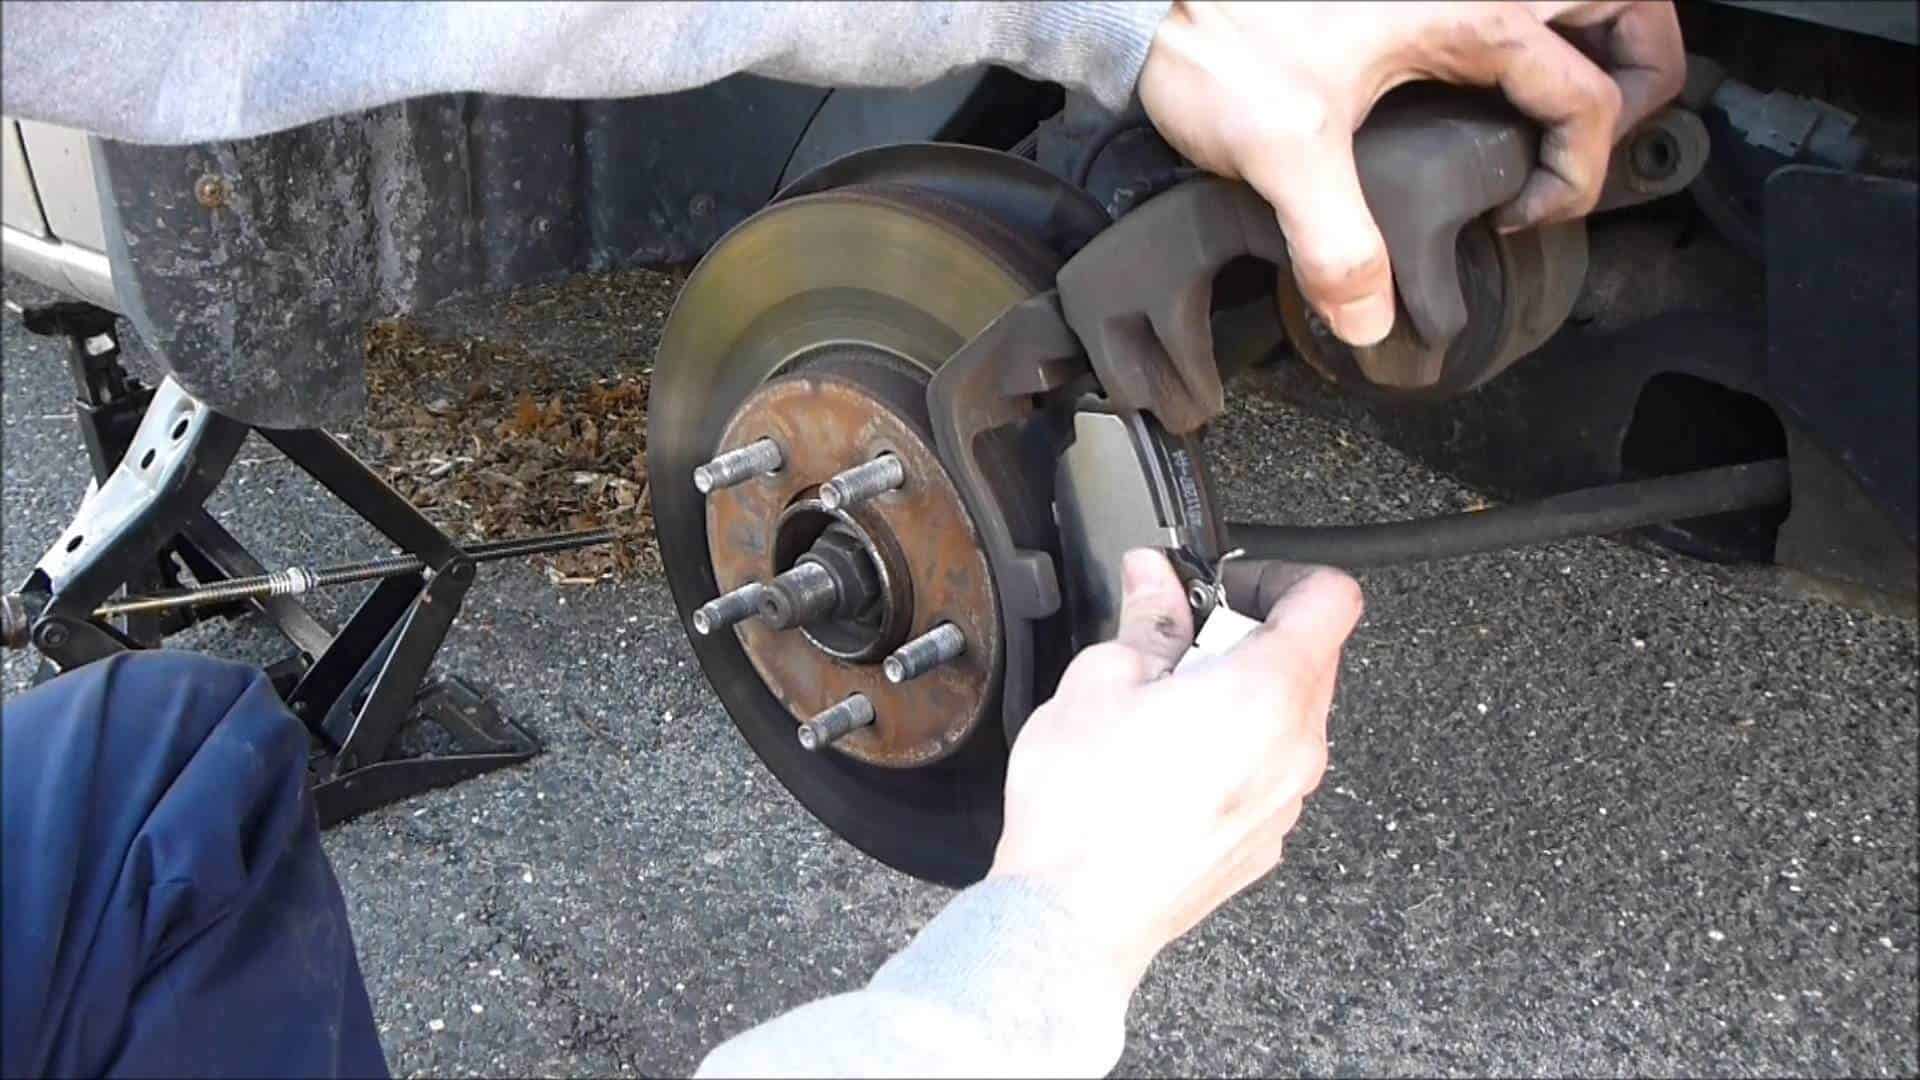 Wheel Stud Replacement Cost and Guide